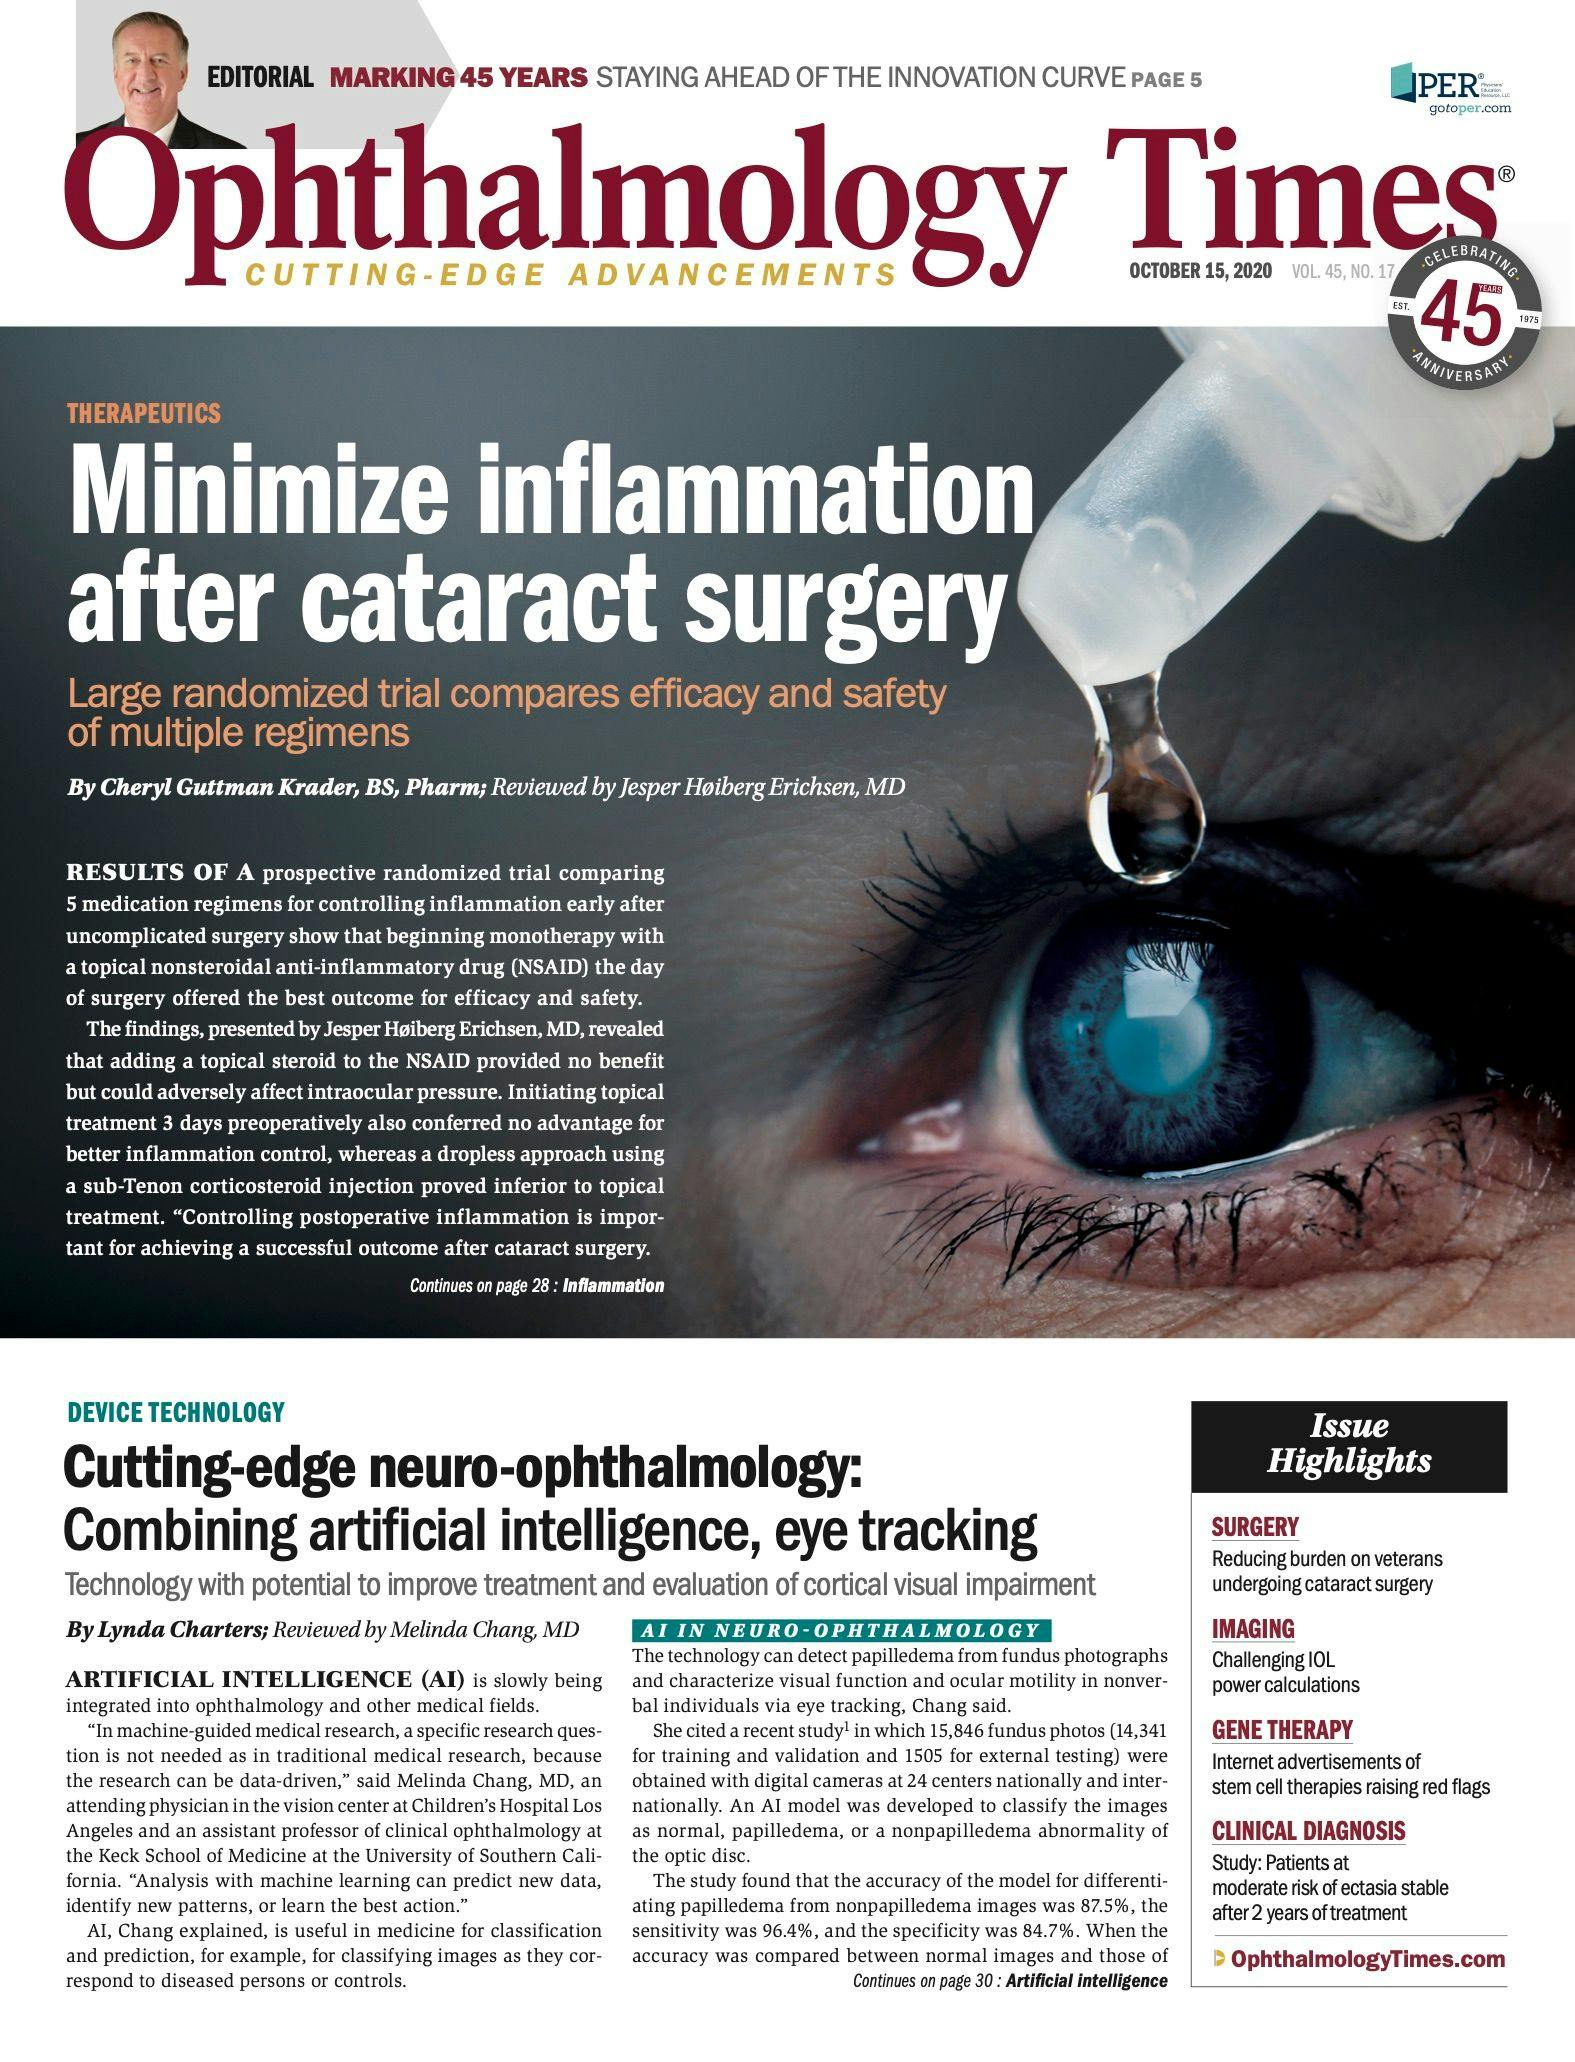 Ophthalmology Times: October 15, 2020